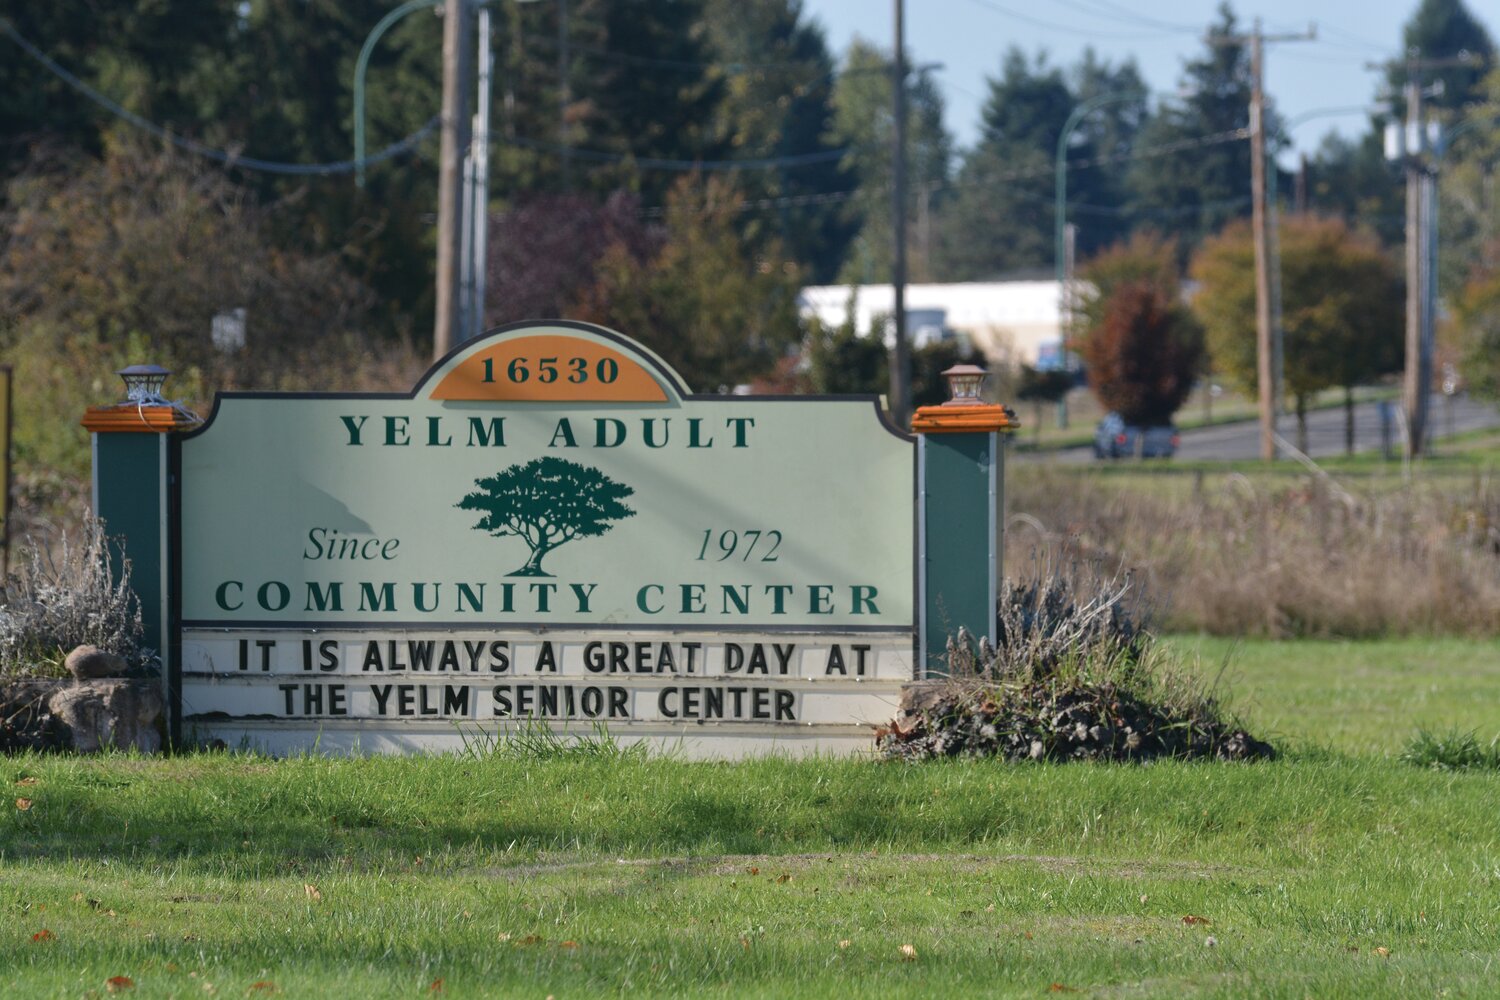 The Yelm Senior Center is located at 16530 103rd Ave. SE in Yelm.